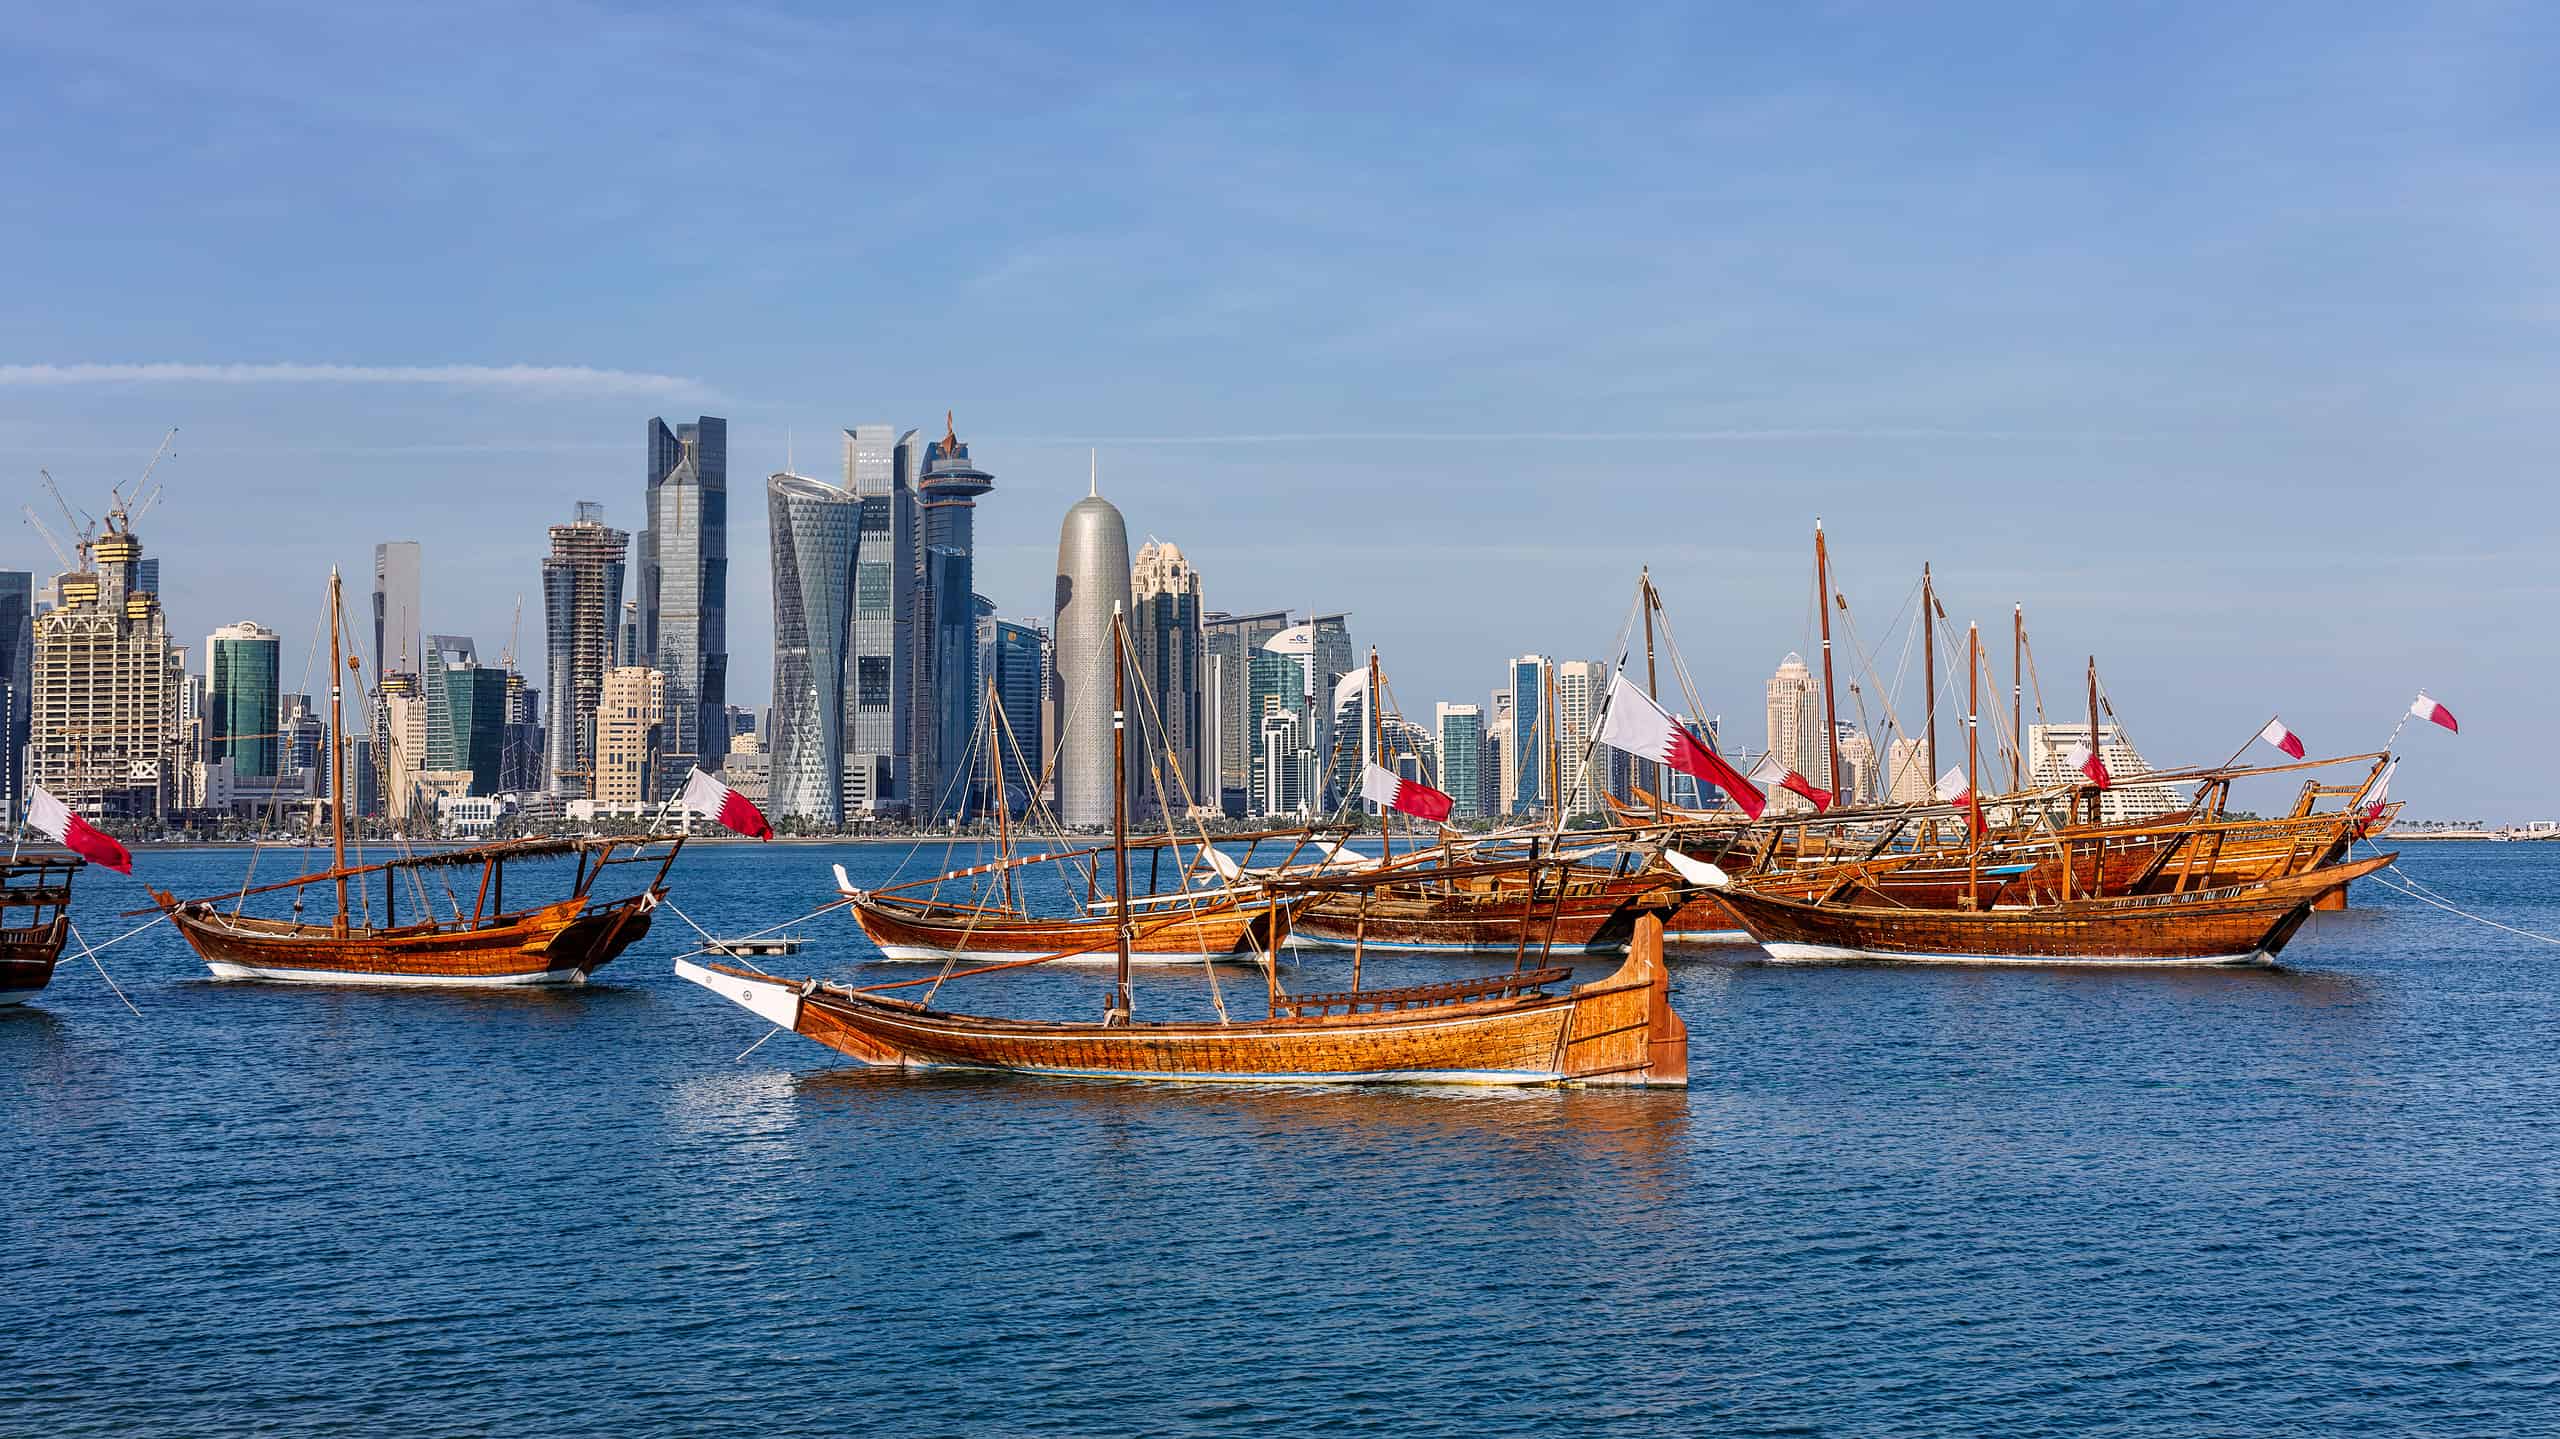 The Flag of Qatar is flown prominently in many public places, including on boats.